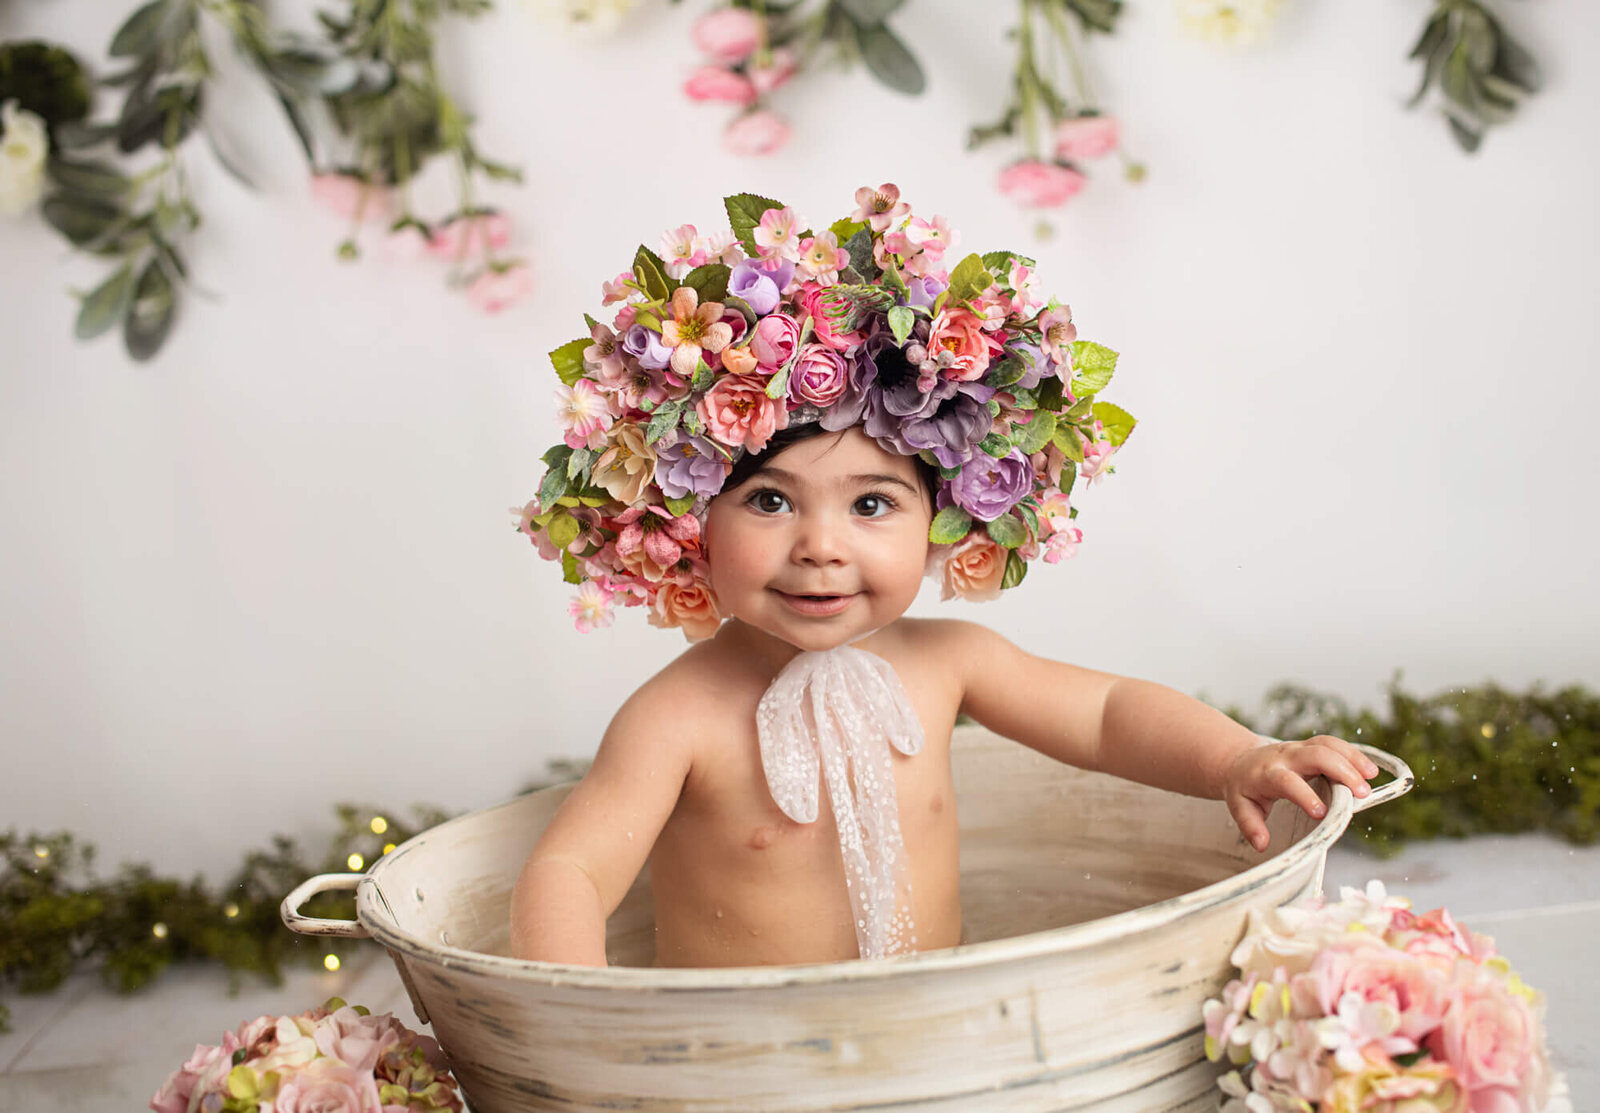 Baby girl with floral bonnet in tub